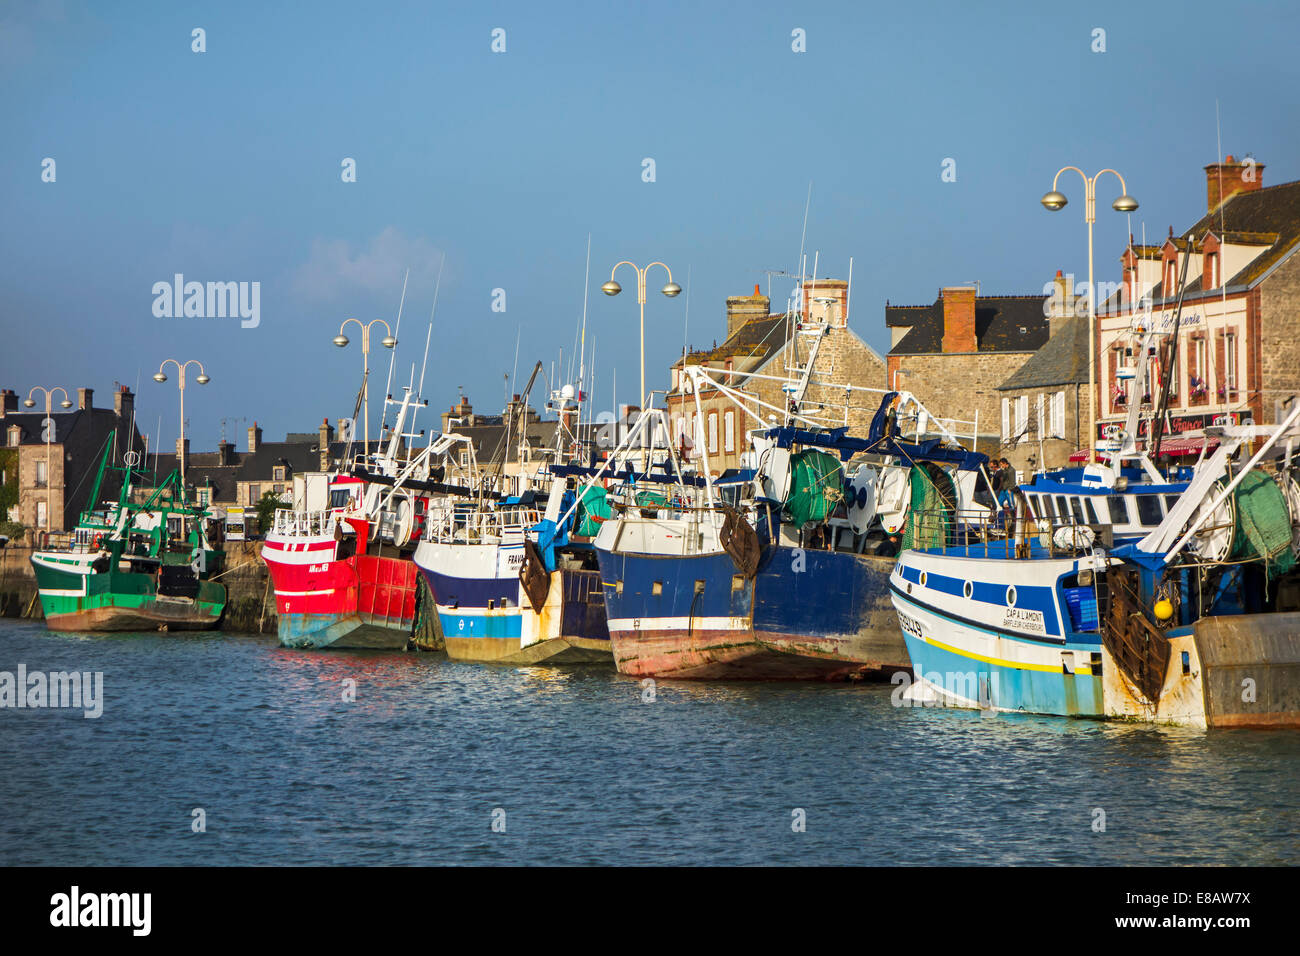 Colourful fishing trawlers / draggers docked in the Barfleur harbour, Lower Normandy, France Stock Photo